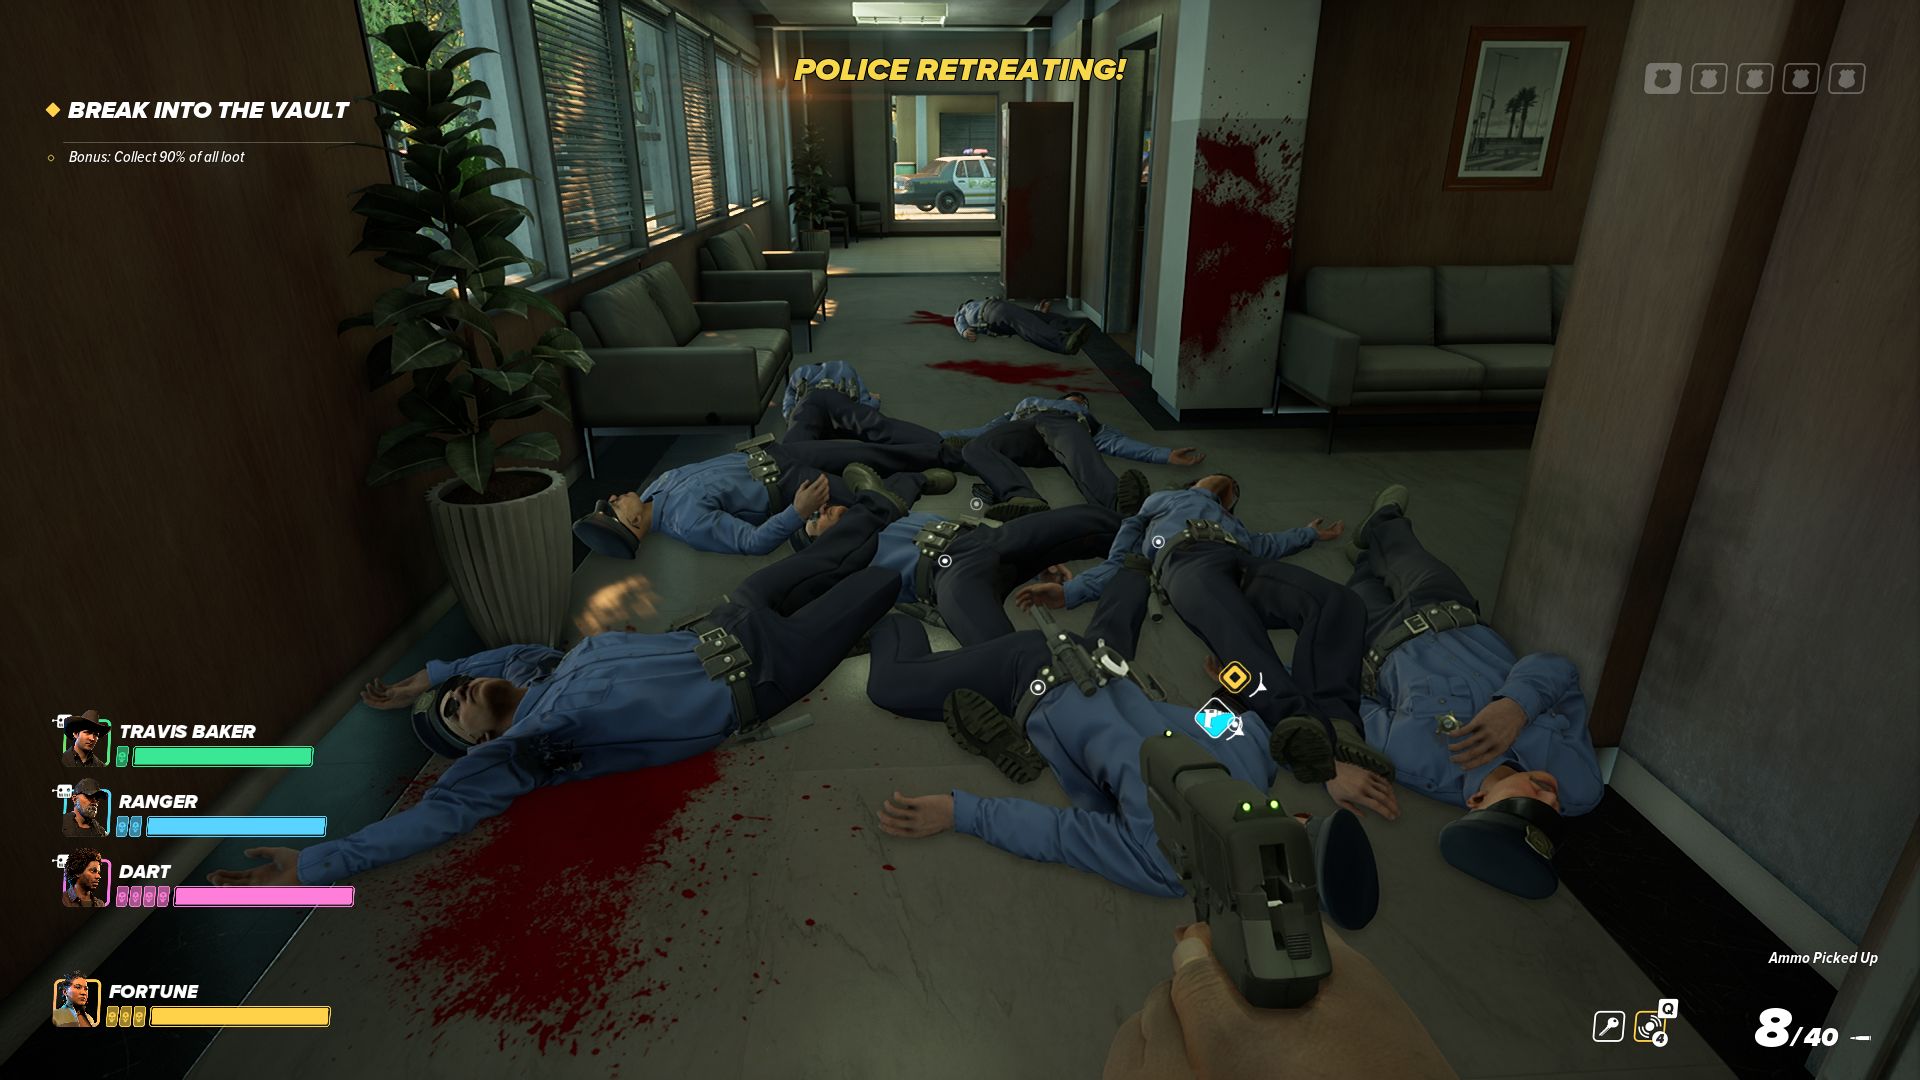 A pile of dead police officers in the hallways of a bank, under a pop-up warning telling you the police are retreating